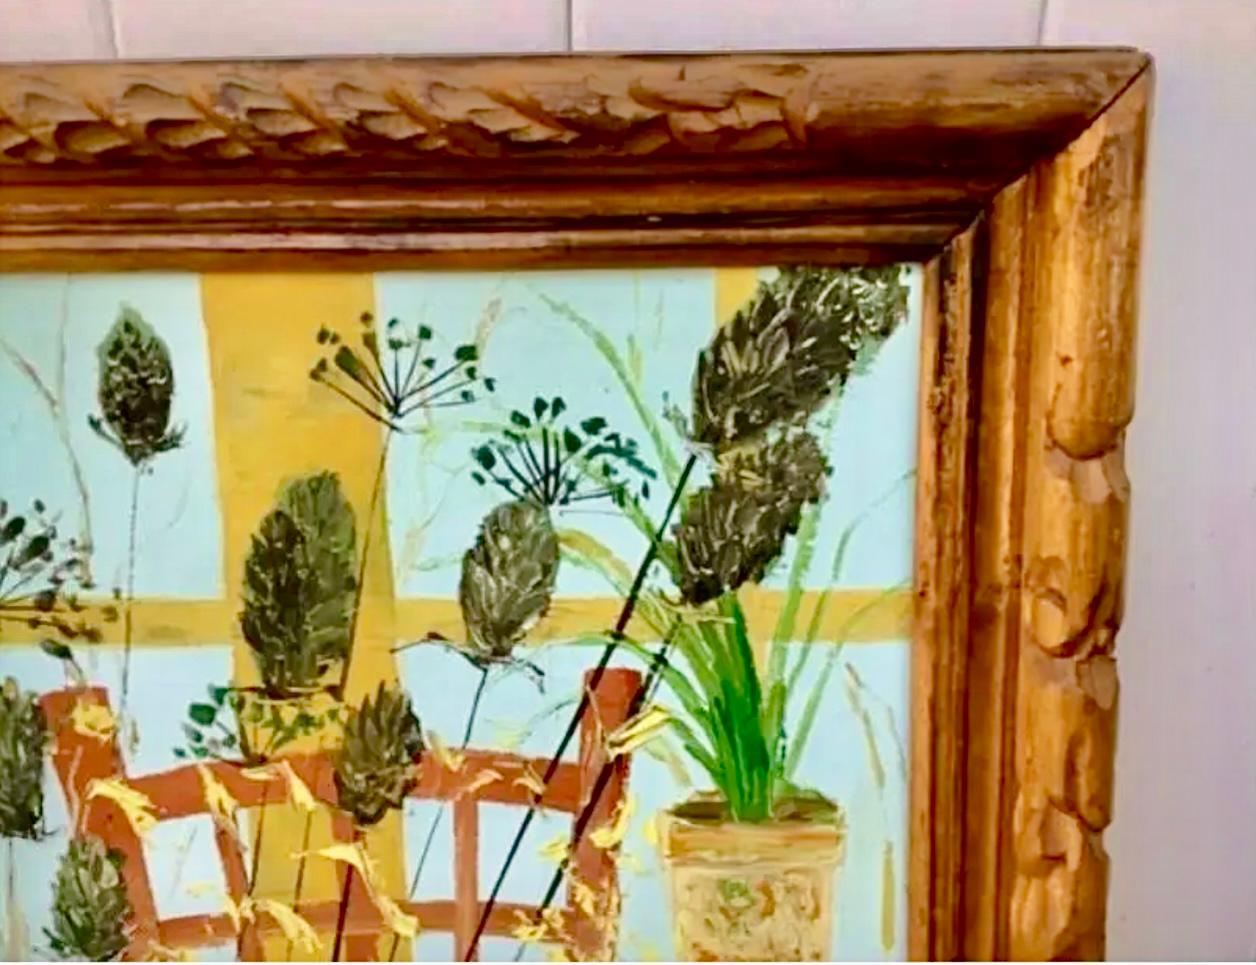 Gorgeous oversized midcentury oil painting on canvas. Painting is of flowers and chair in front of windowpane. Vibrant golds, reds, and green in front of window, all surrounded by an ornate carved wooden frame. Excellent condition with no scratches.